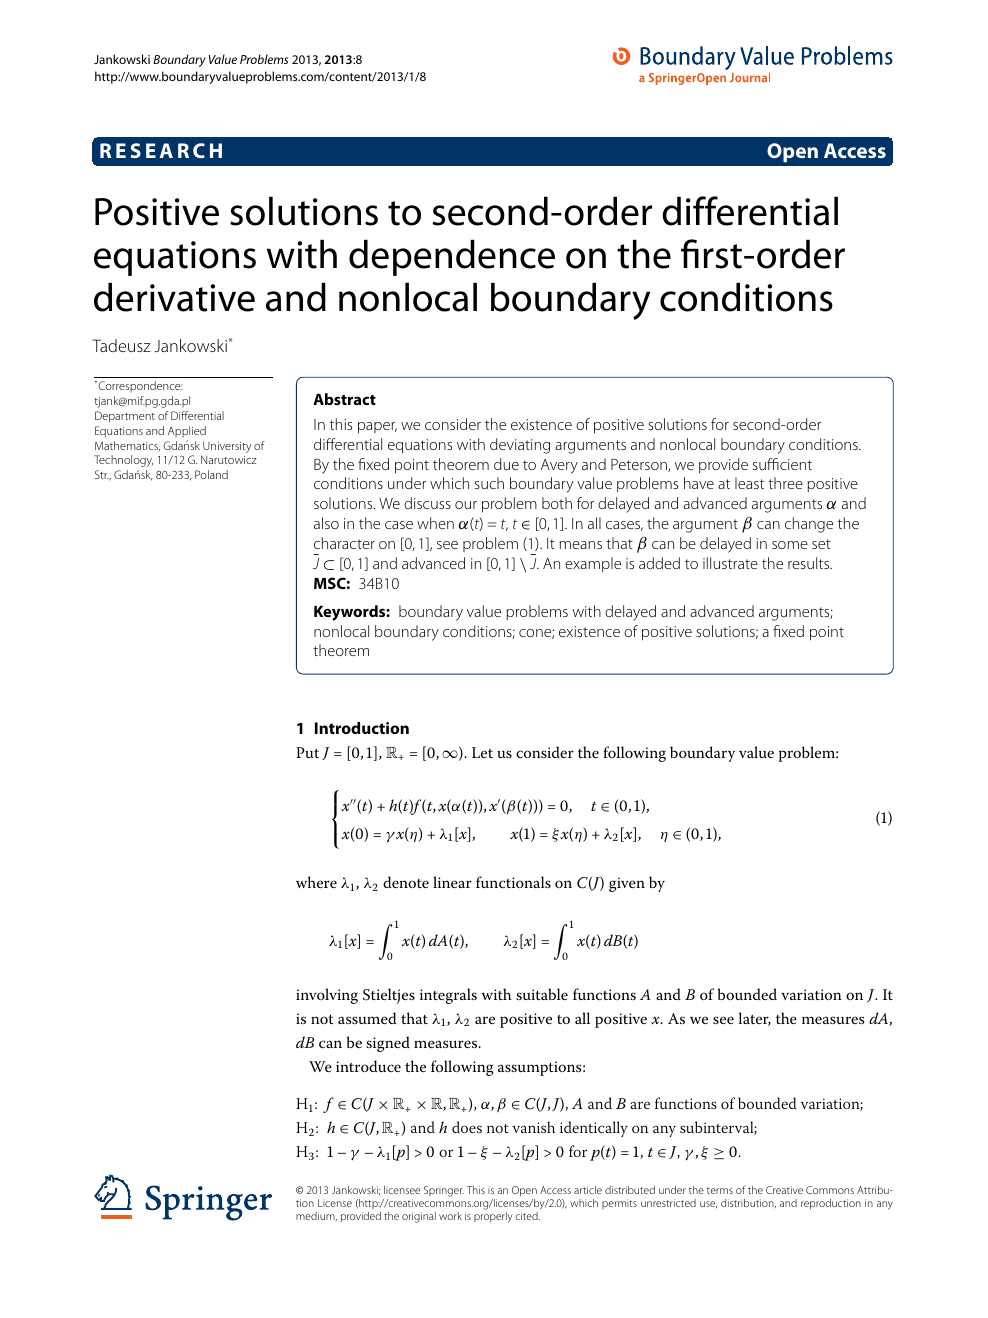 Positive Solutions To Second Order Differential Equations With Dependence On The First Order Derivative And Nonlocal Boundary Conditions Topic Of Research Paper In Mathematics Download Scholarly Article Pdf And Read For Free On